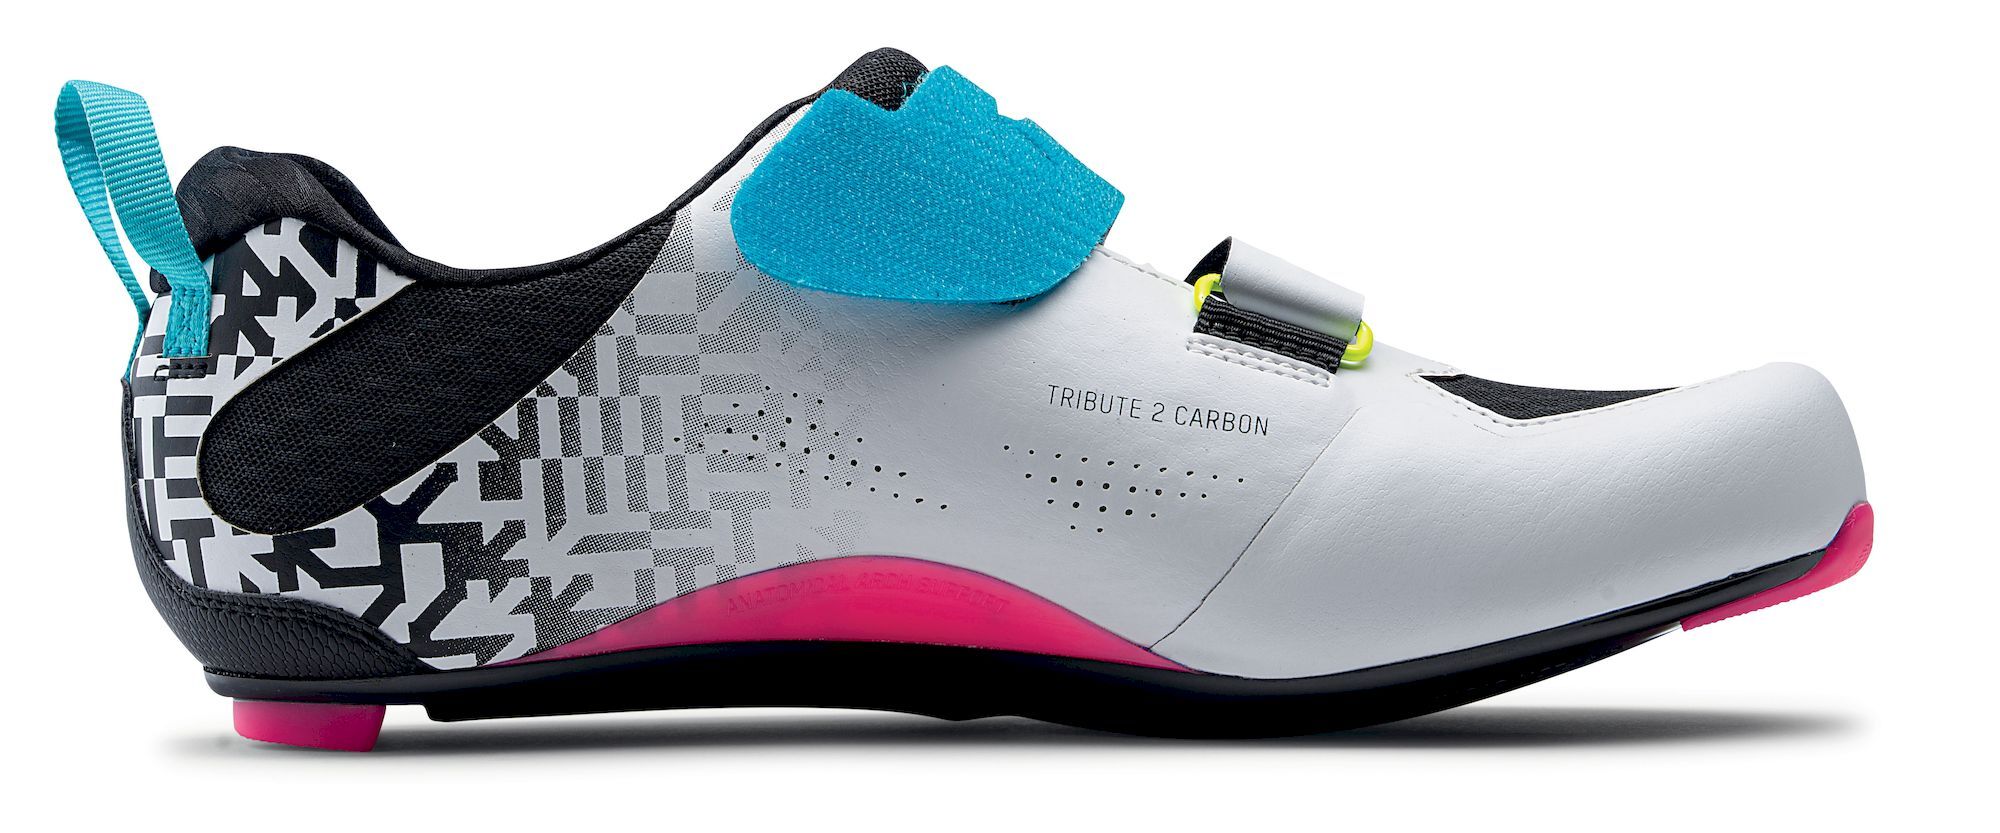 Northwave Tribute 2 Carbon - Cycling shoes | Hardloop